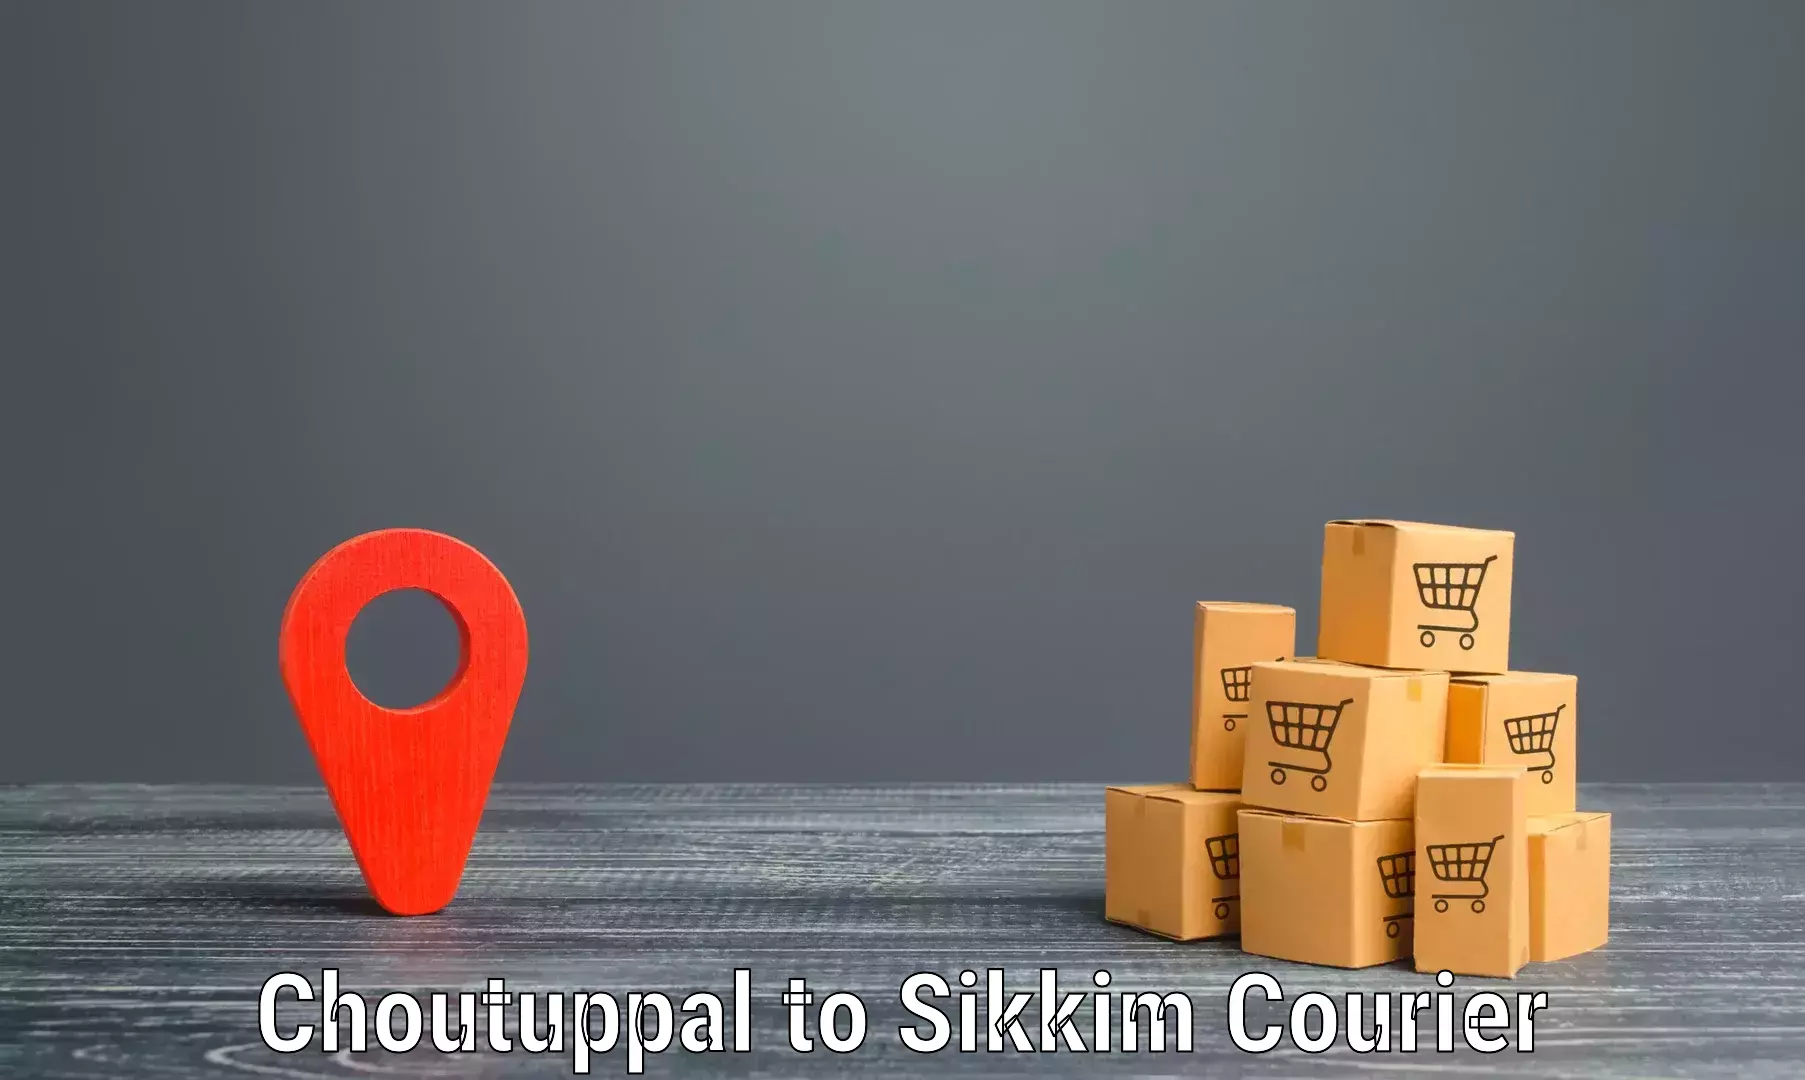 Express mail service Choutuppal to East Sikkim